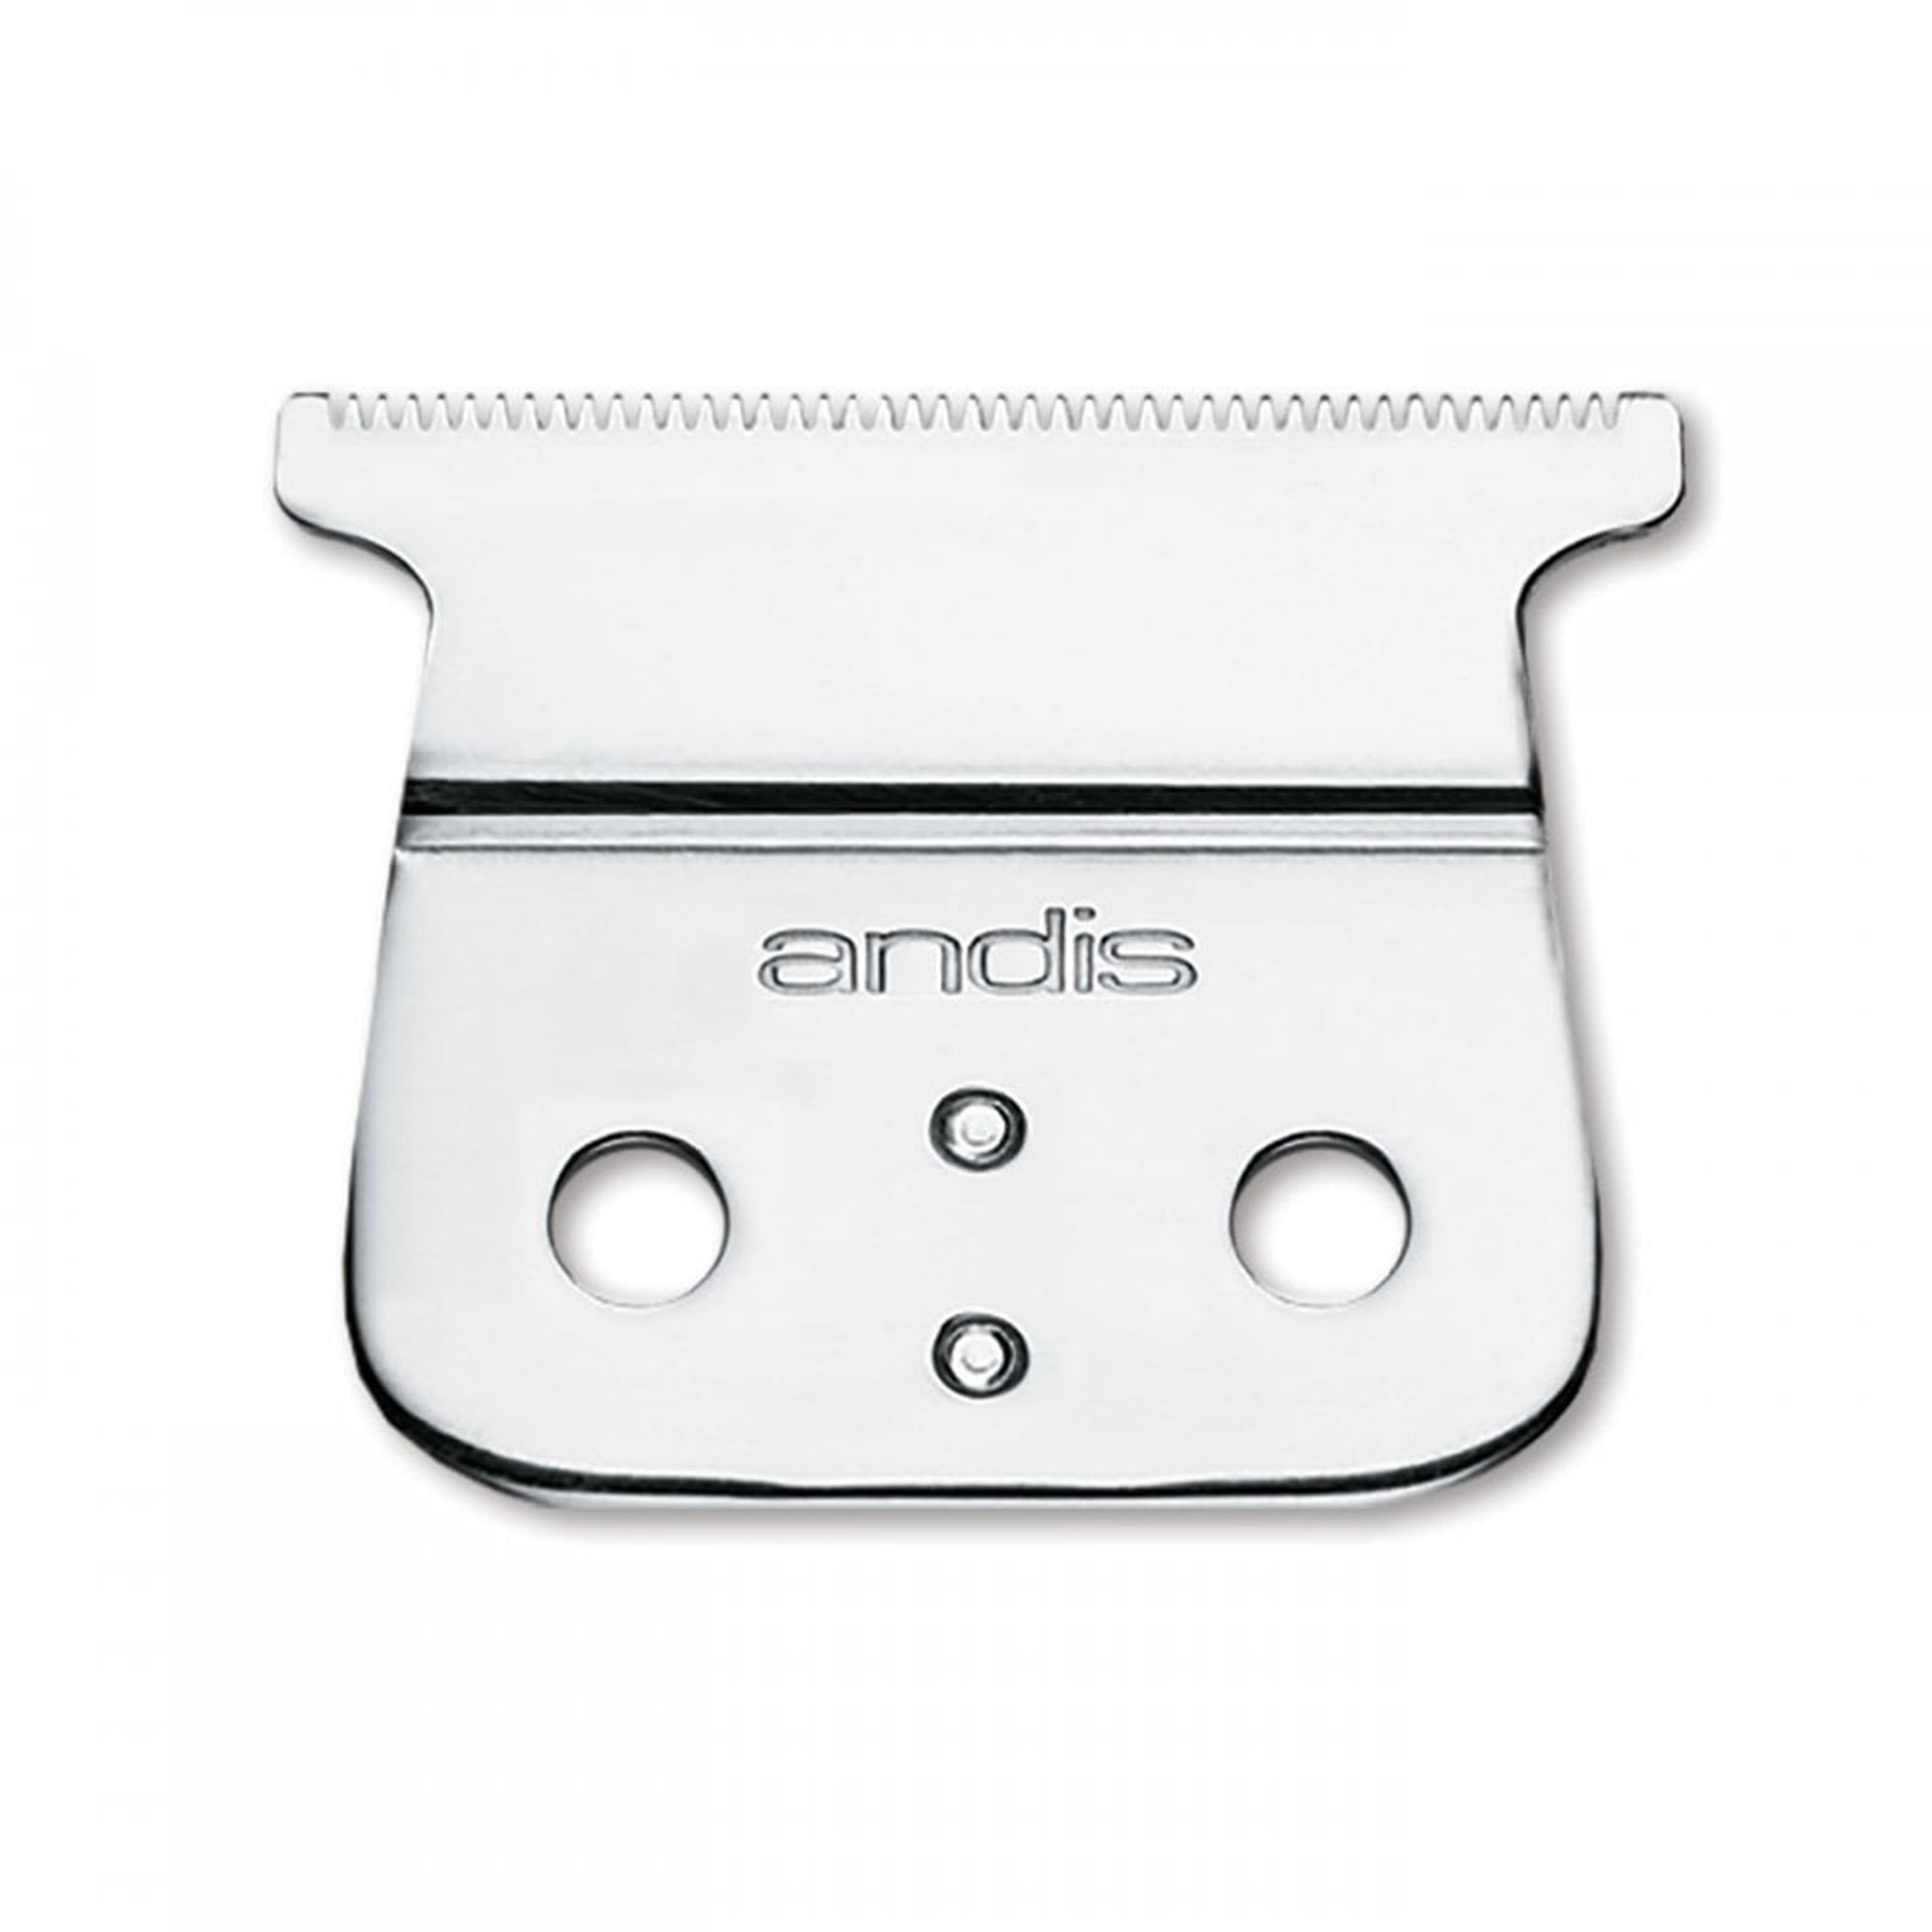 Andis - T-Outliner Cordless Li Replacement Blade #04535